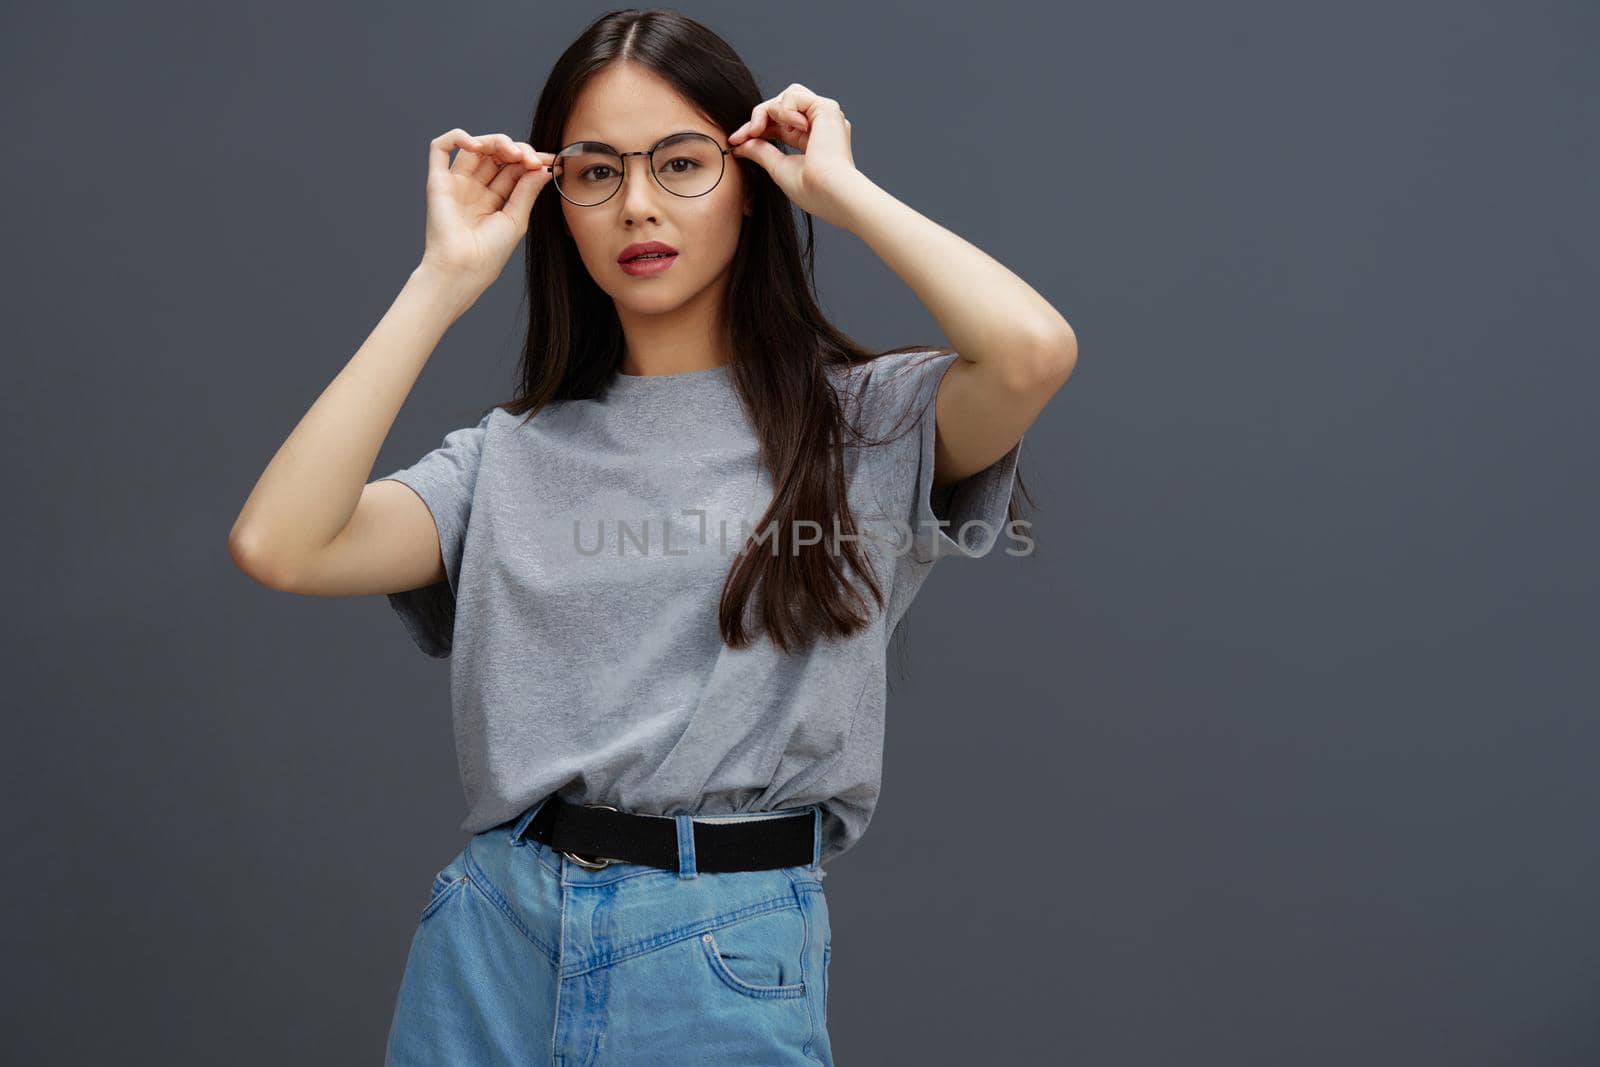 beautiful woman glasses on face fashion lifestyle gray t-shirt Gray background by SHOTPRIME